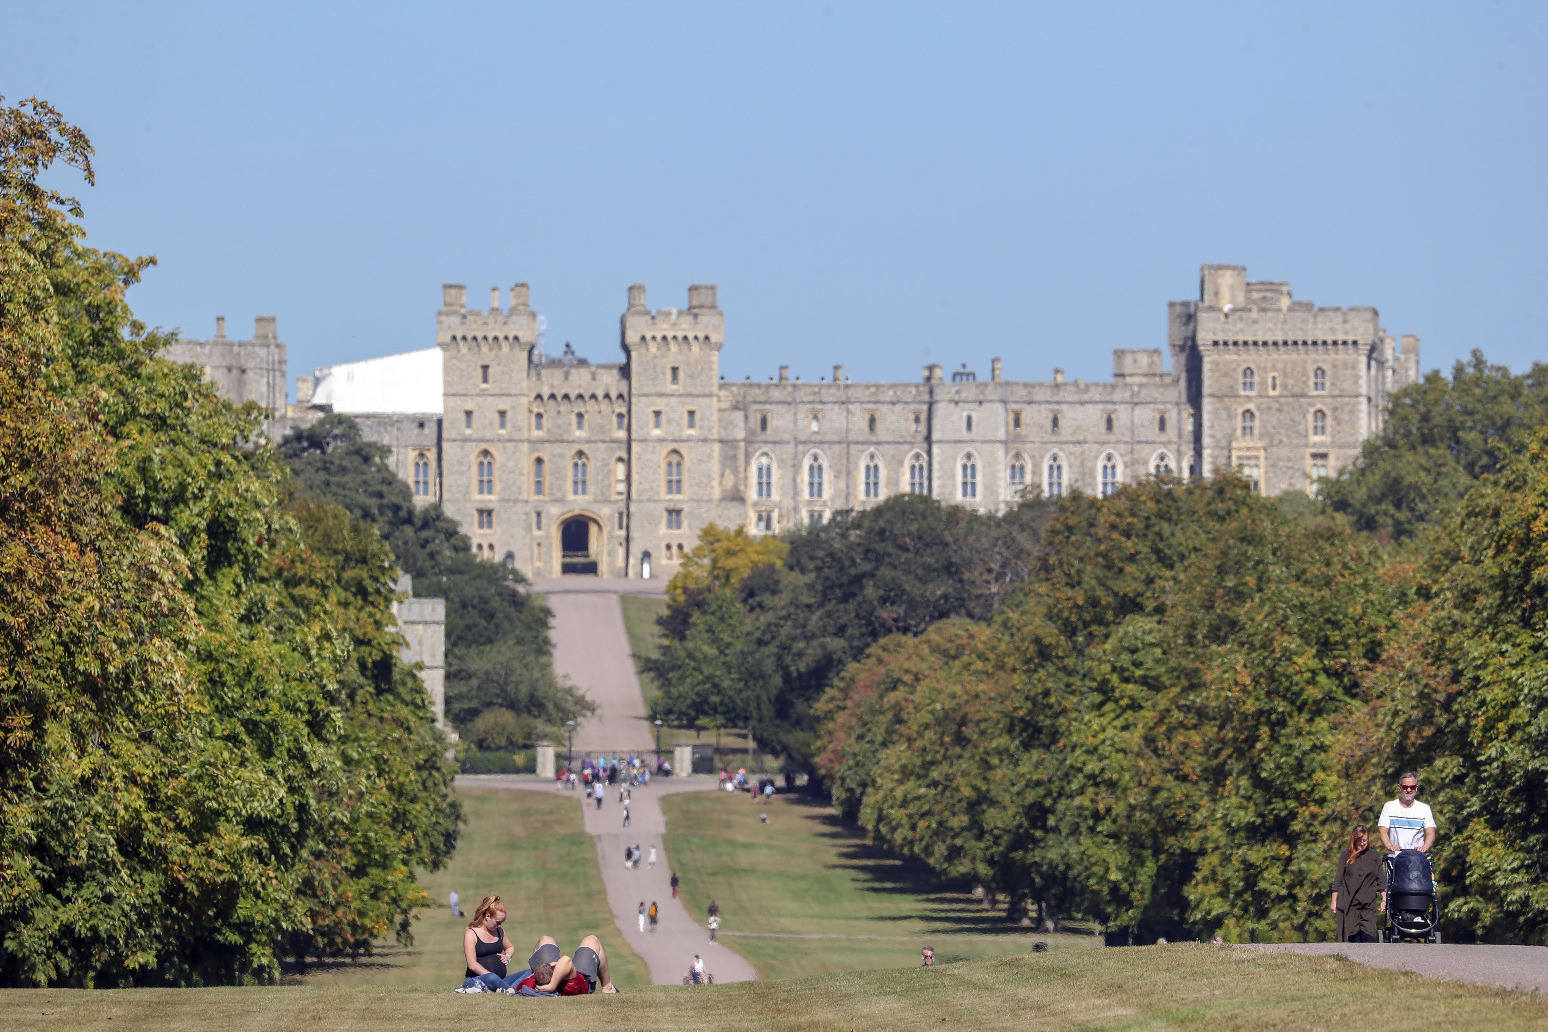 Free tickets to coronation concert at Windsor Castle up for grabs 